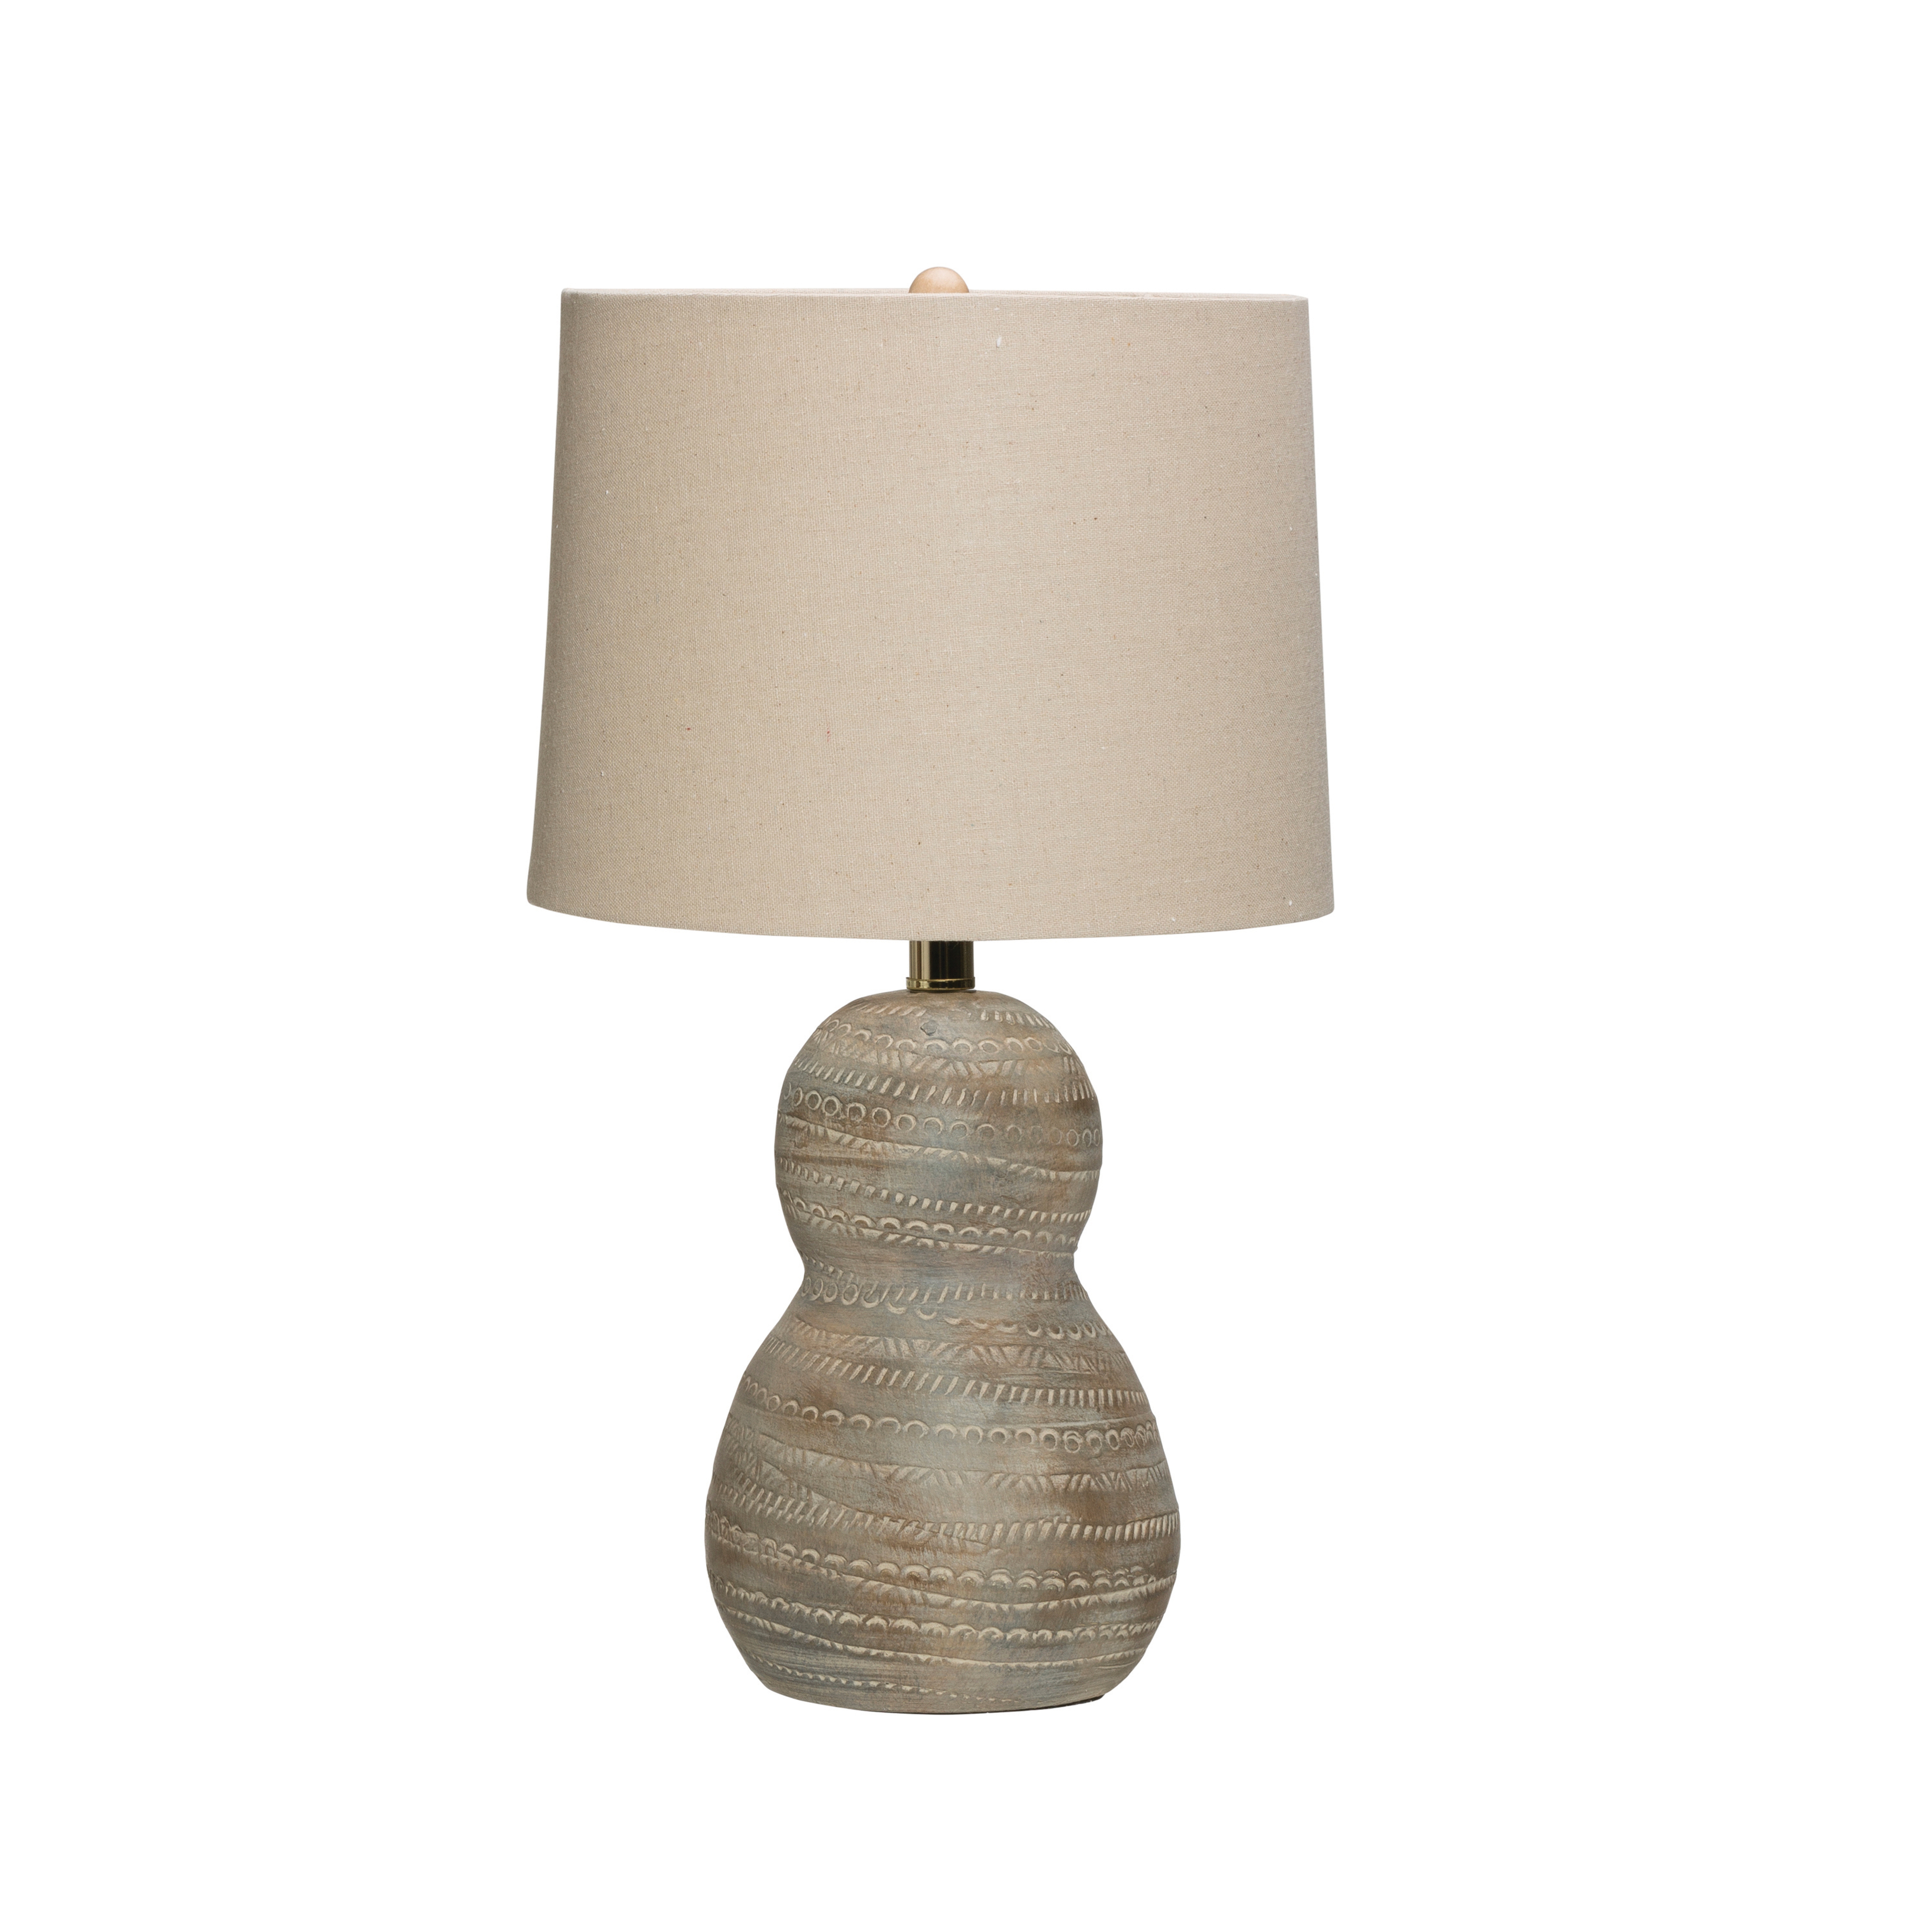 Distressed Debossed Terracotta Table Lamp with Linen Shade - Nomad Home